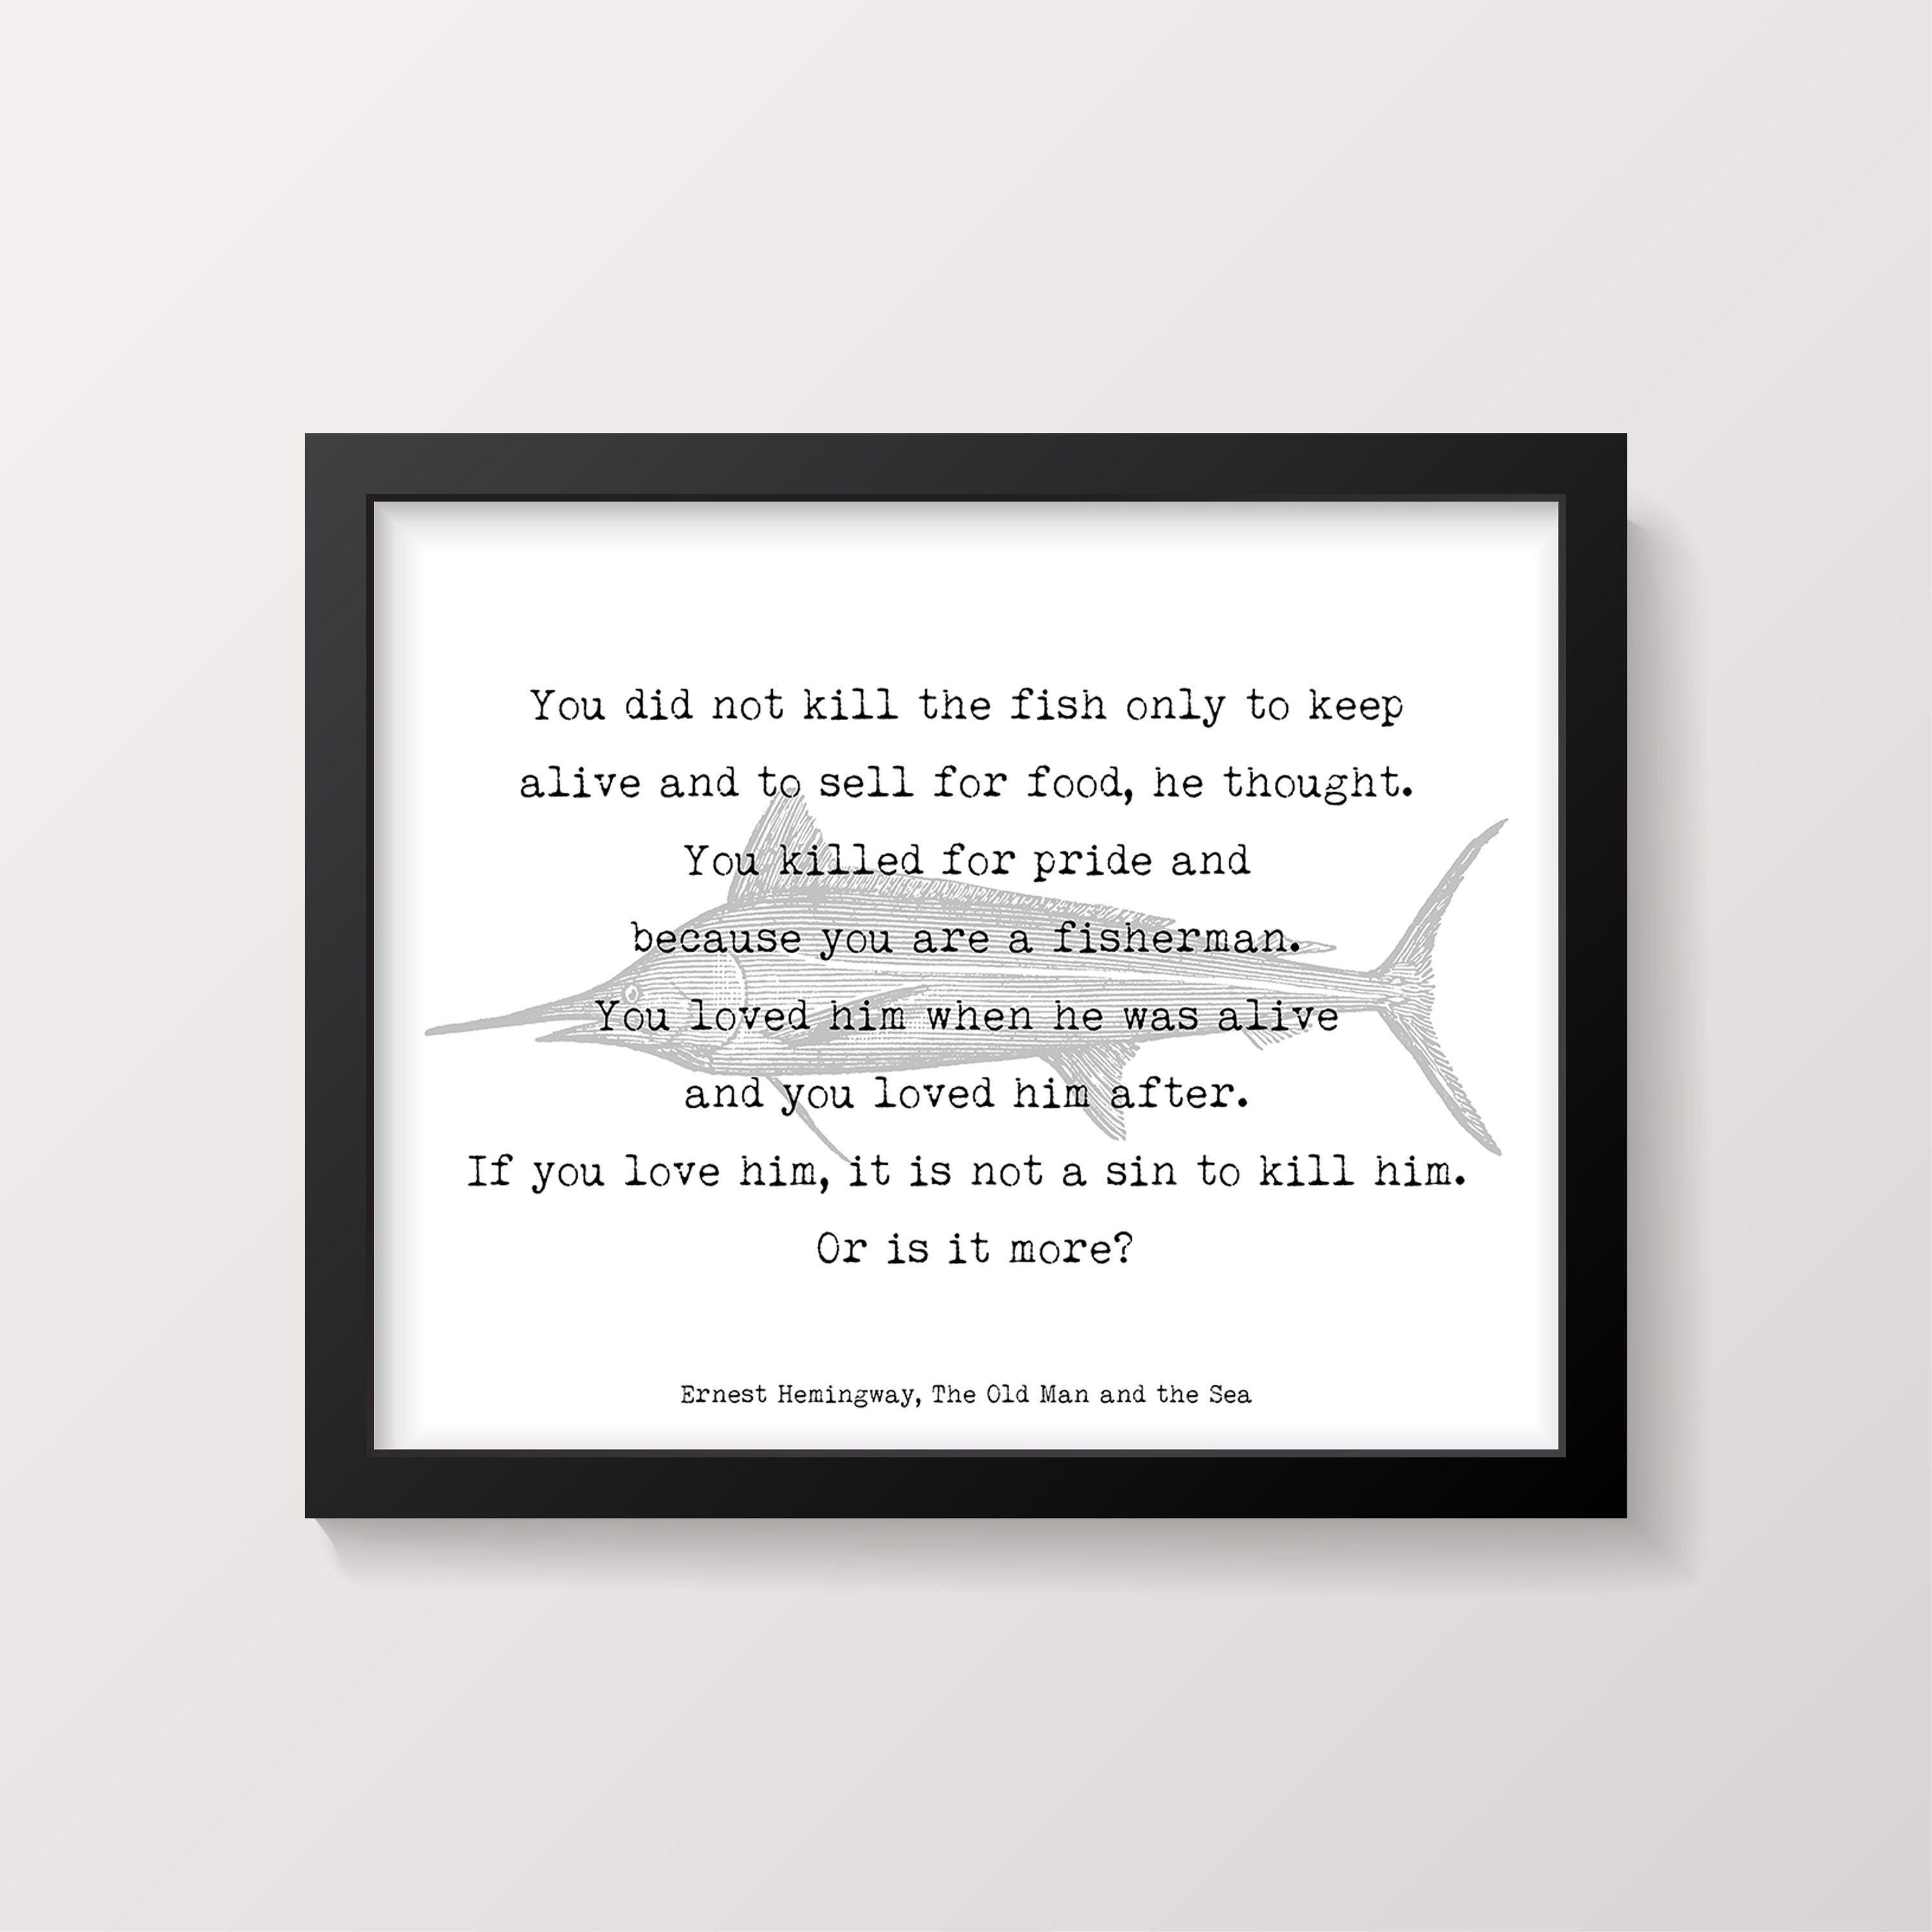 Ernest Hemingway fishing quote print, vintage fish poster print unframed black white from The Old Man and the Sea book